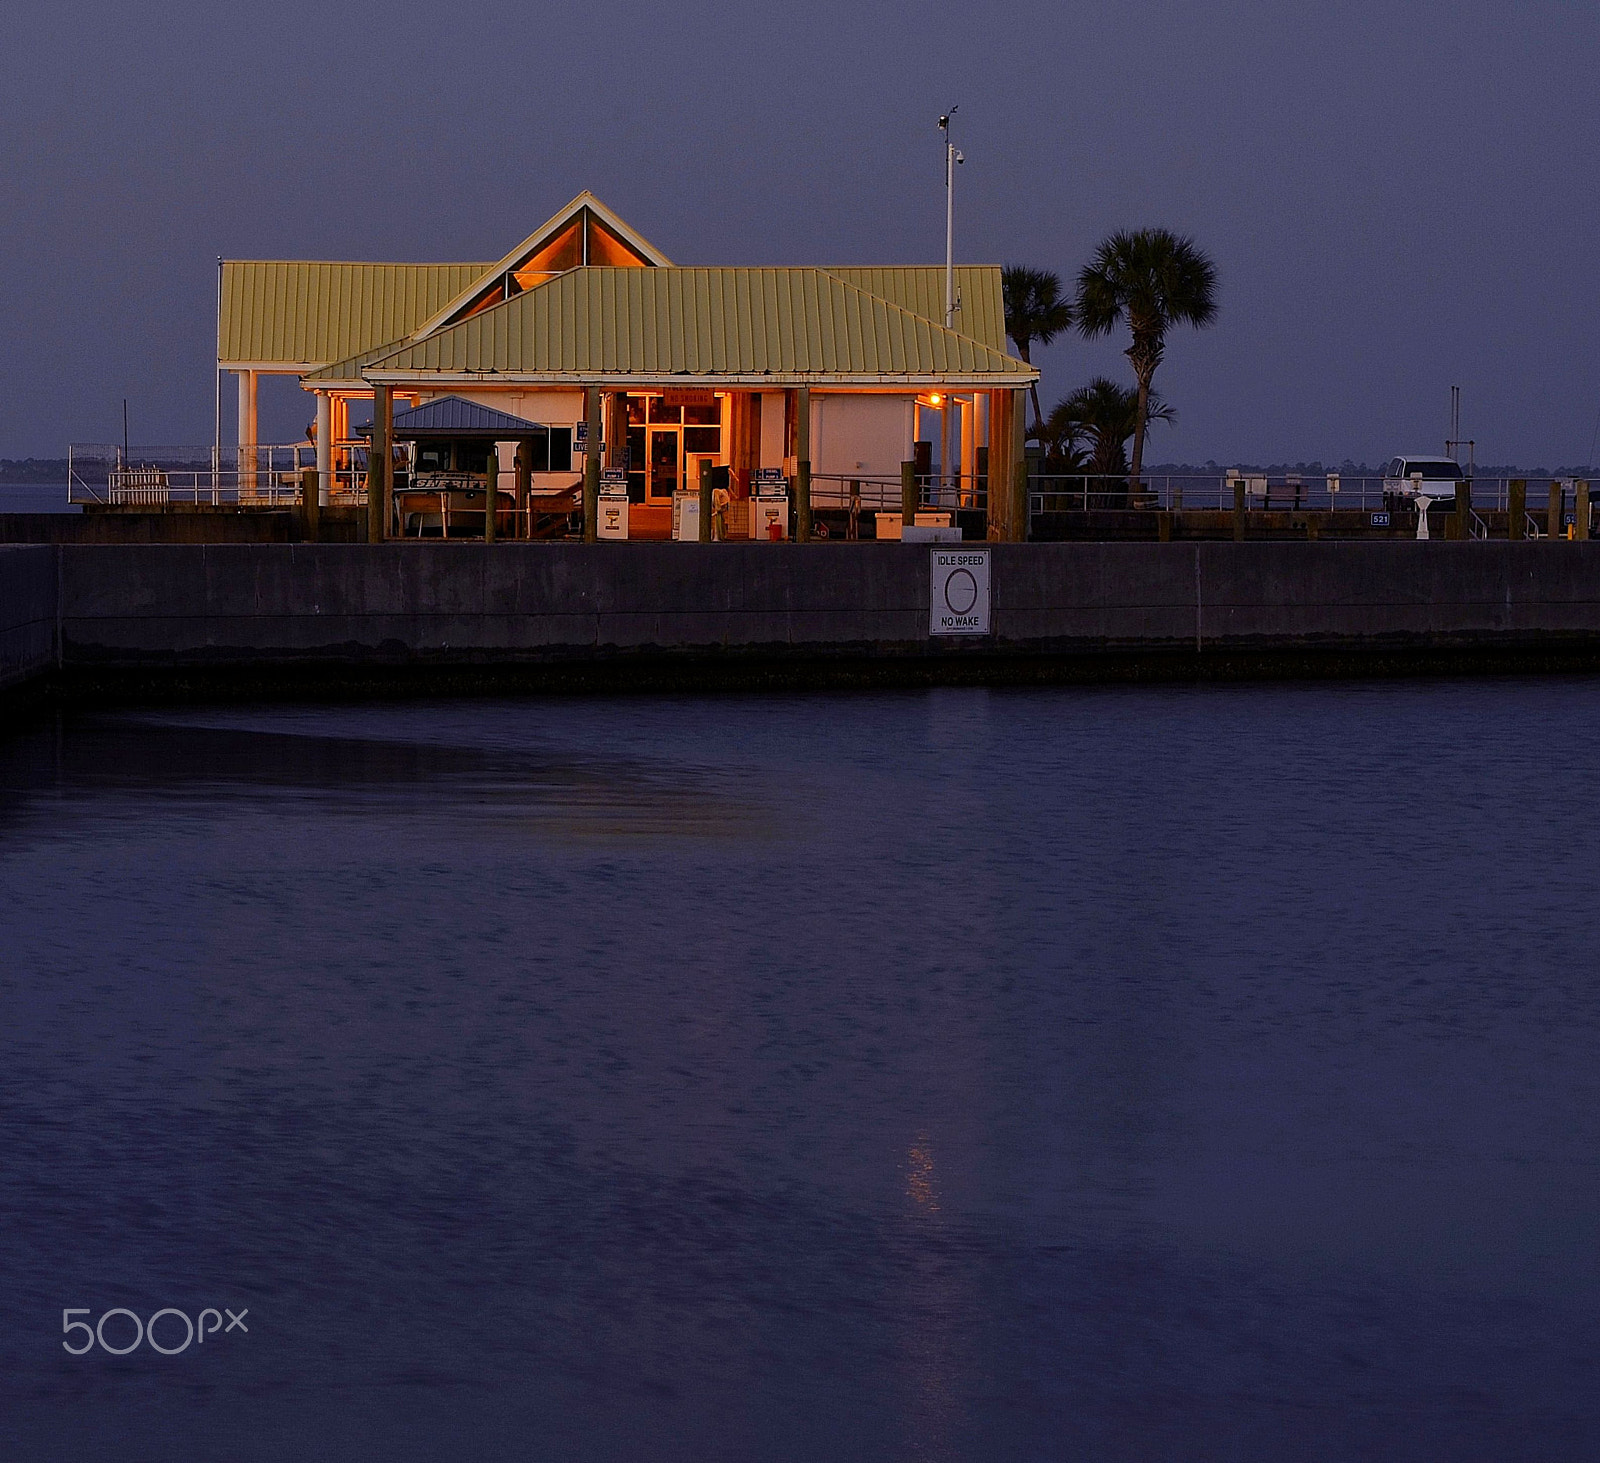 Nikon D5100 + Sigma 17-70mm F2.8-4 DC Macro OS HSM | C sample photo. The boat house before dawn photography